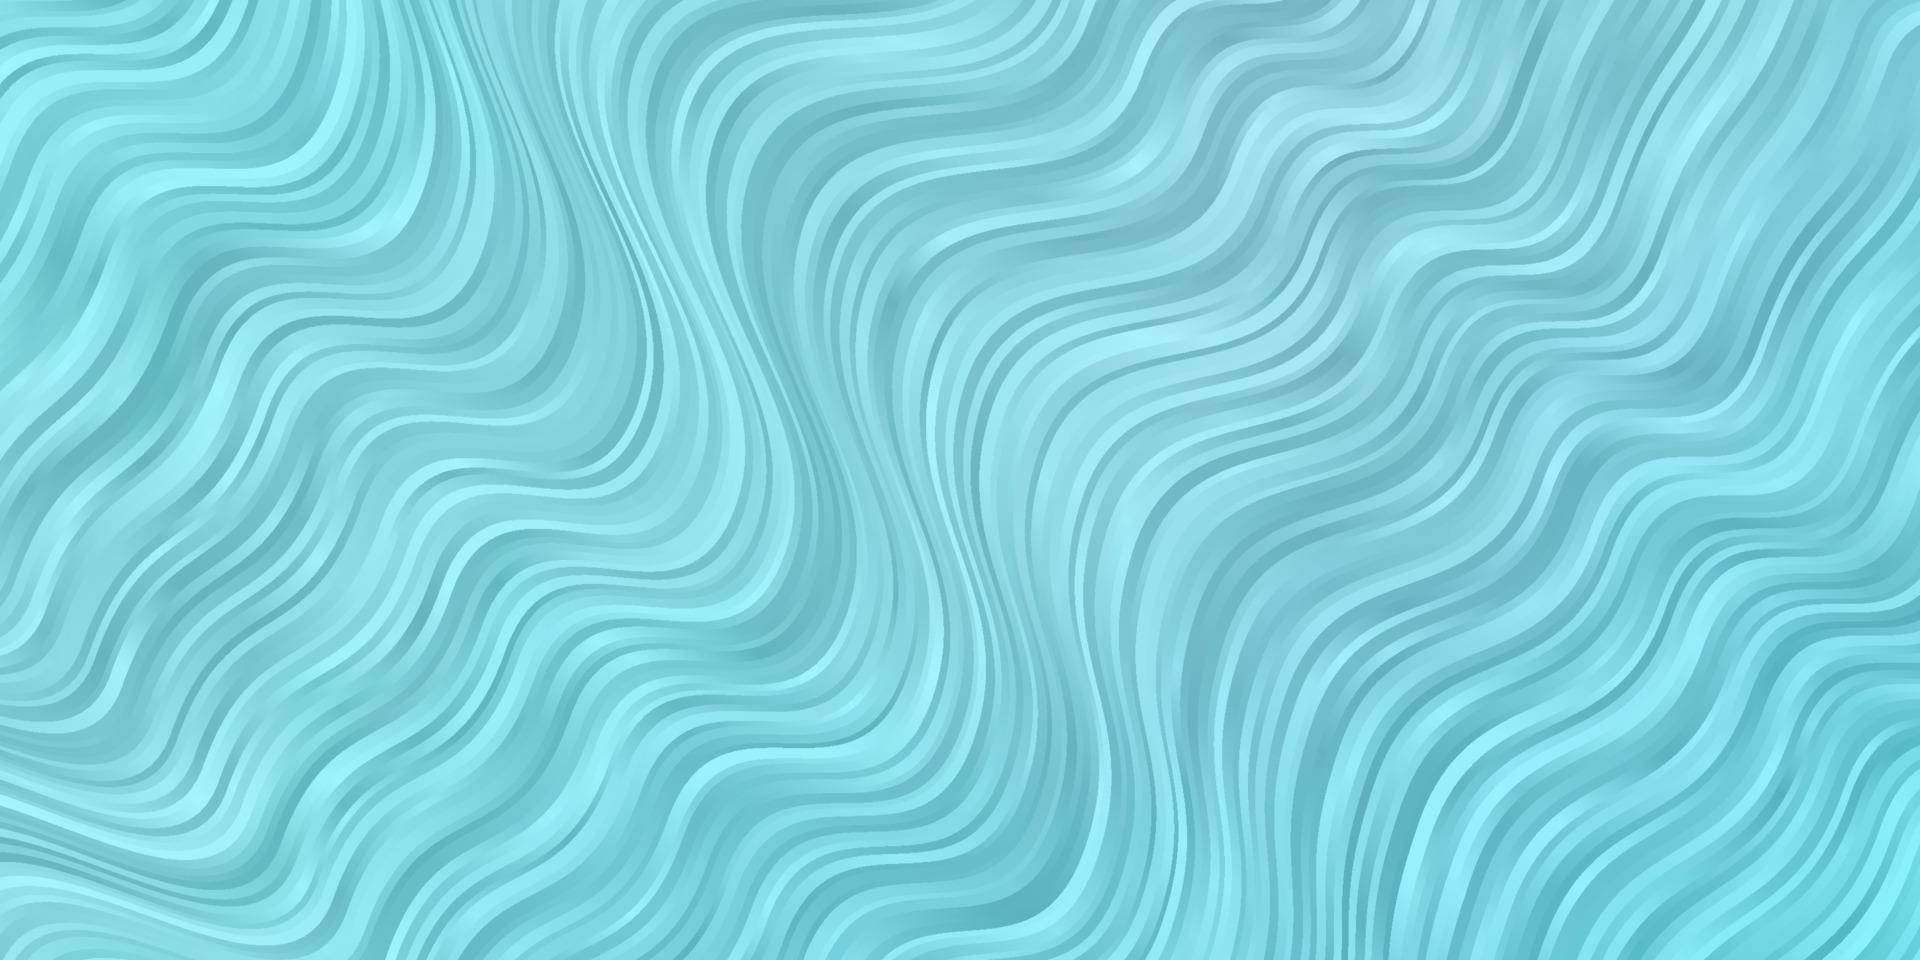 Light BLUE vector background with curves.